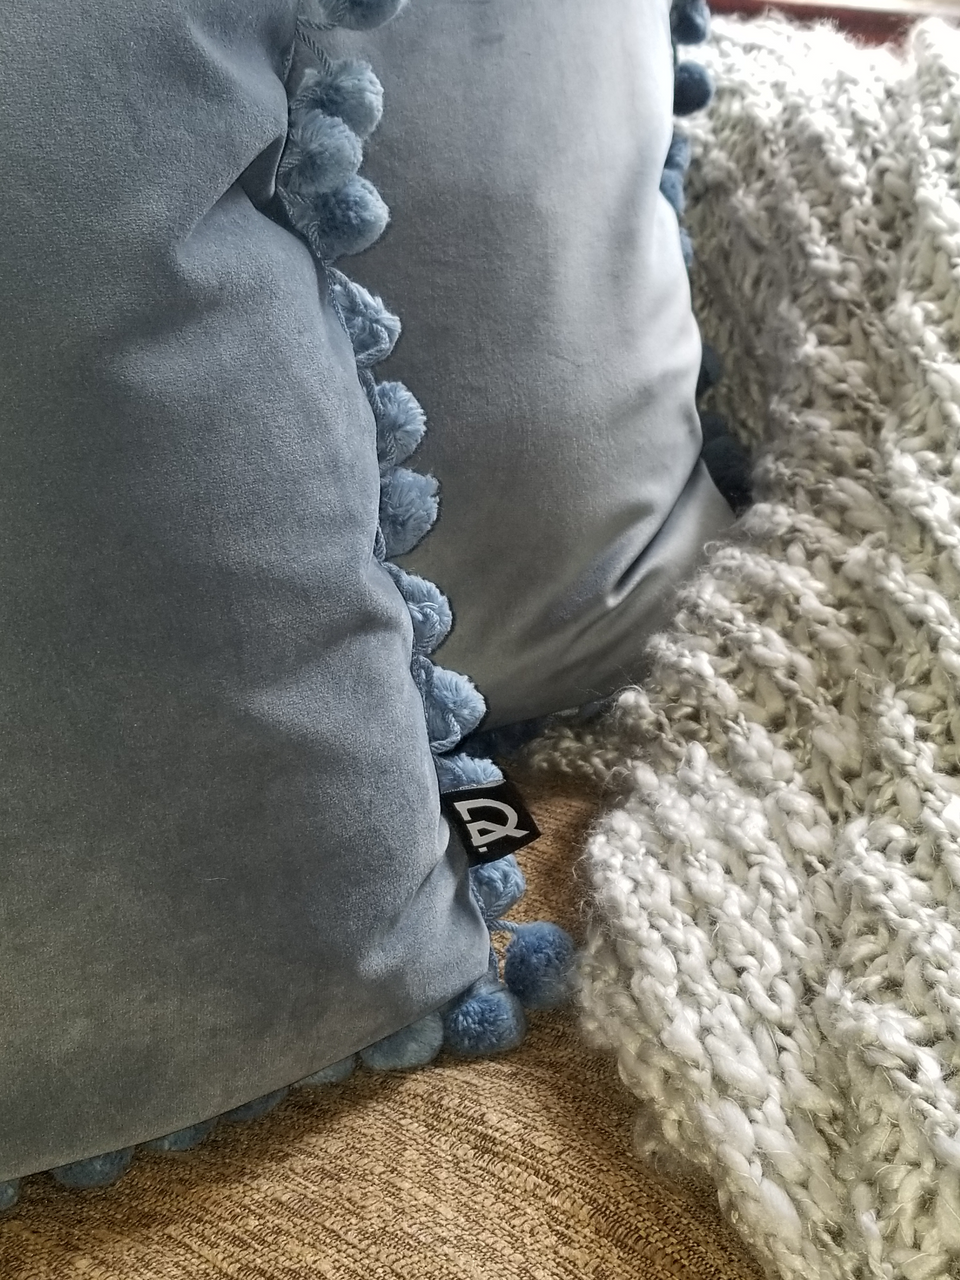 blue velour pillow covers with matching pom pom trim on khaki couch with gray throw cover closeup